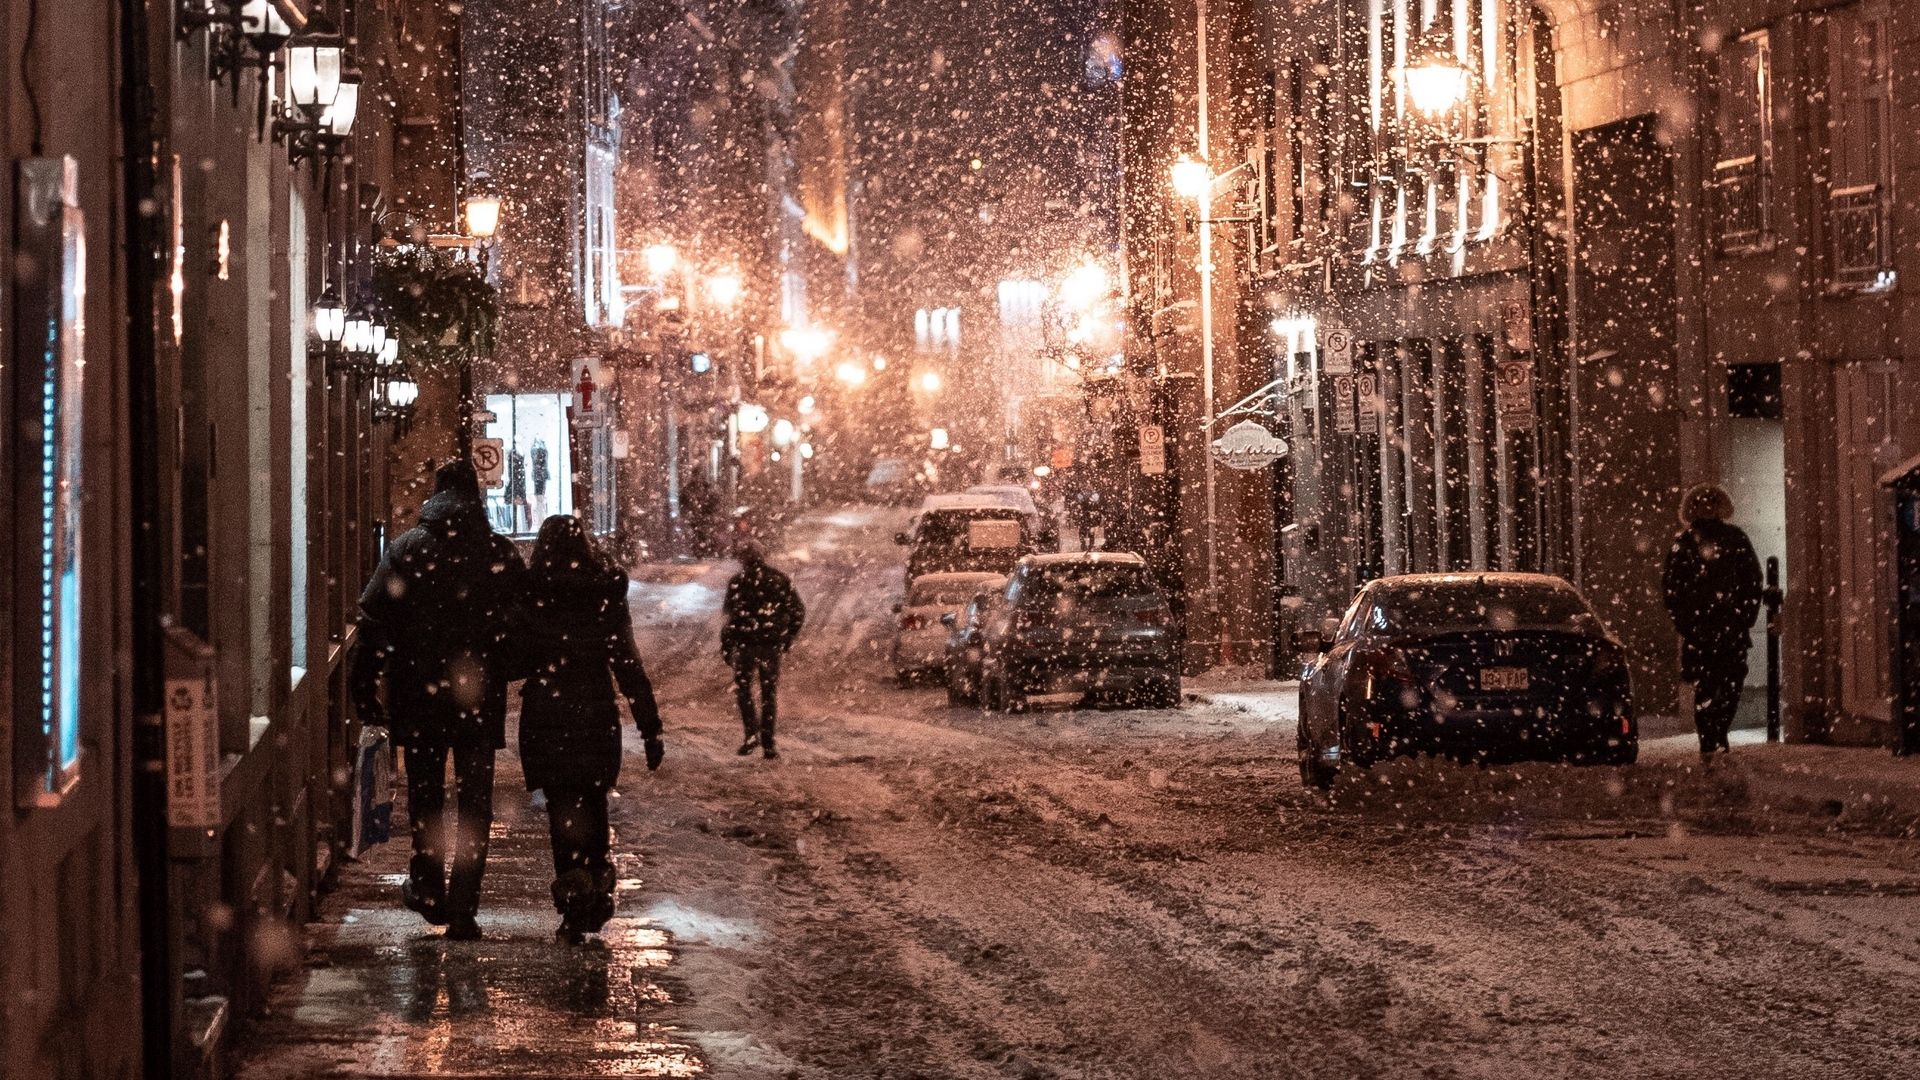 1920x1080 snowfall people street night evening city winter wallpaper [] Need trendy #iPhone7 #iphone7Plus case? Check out